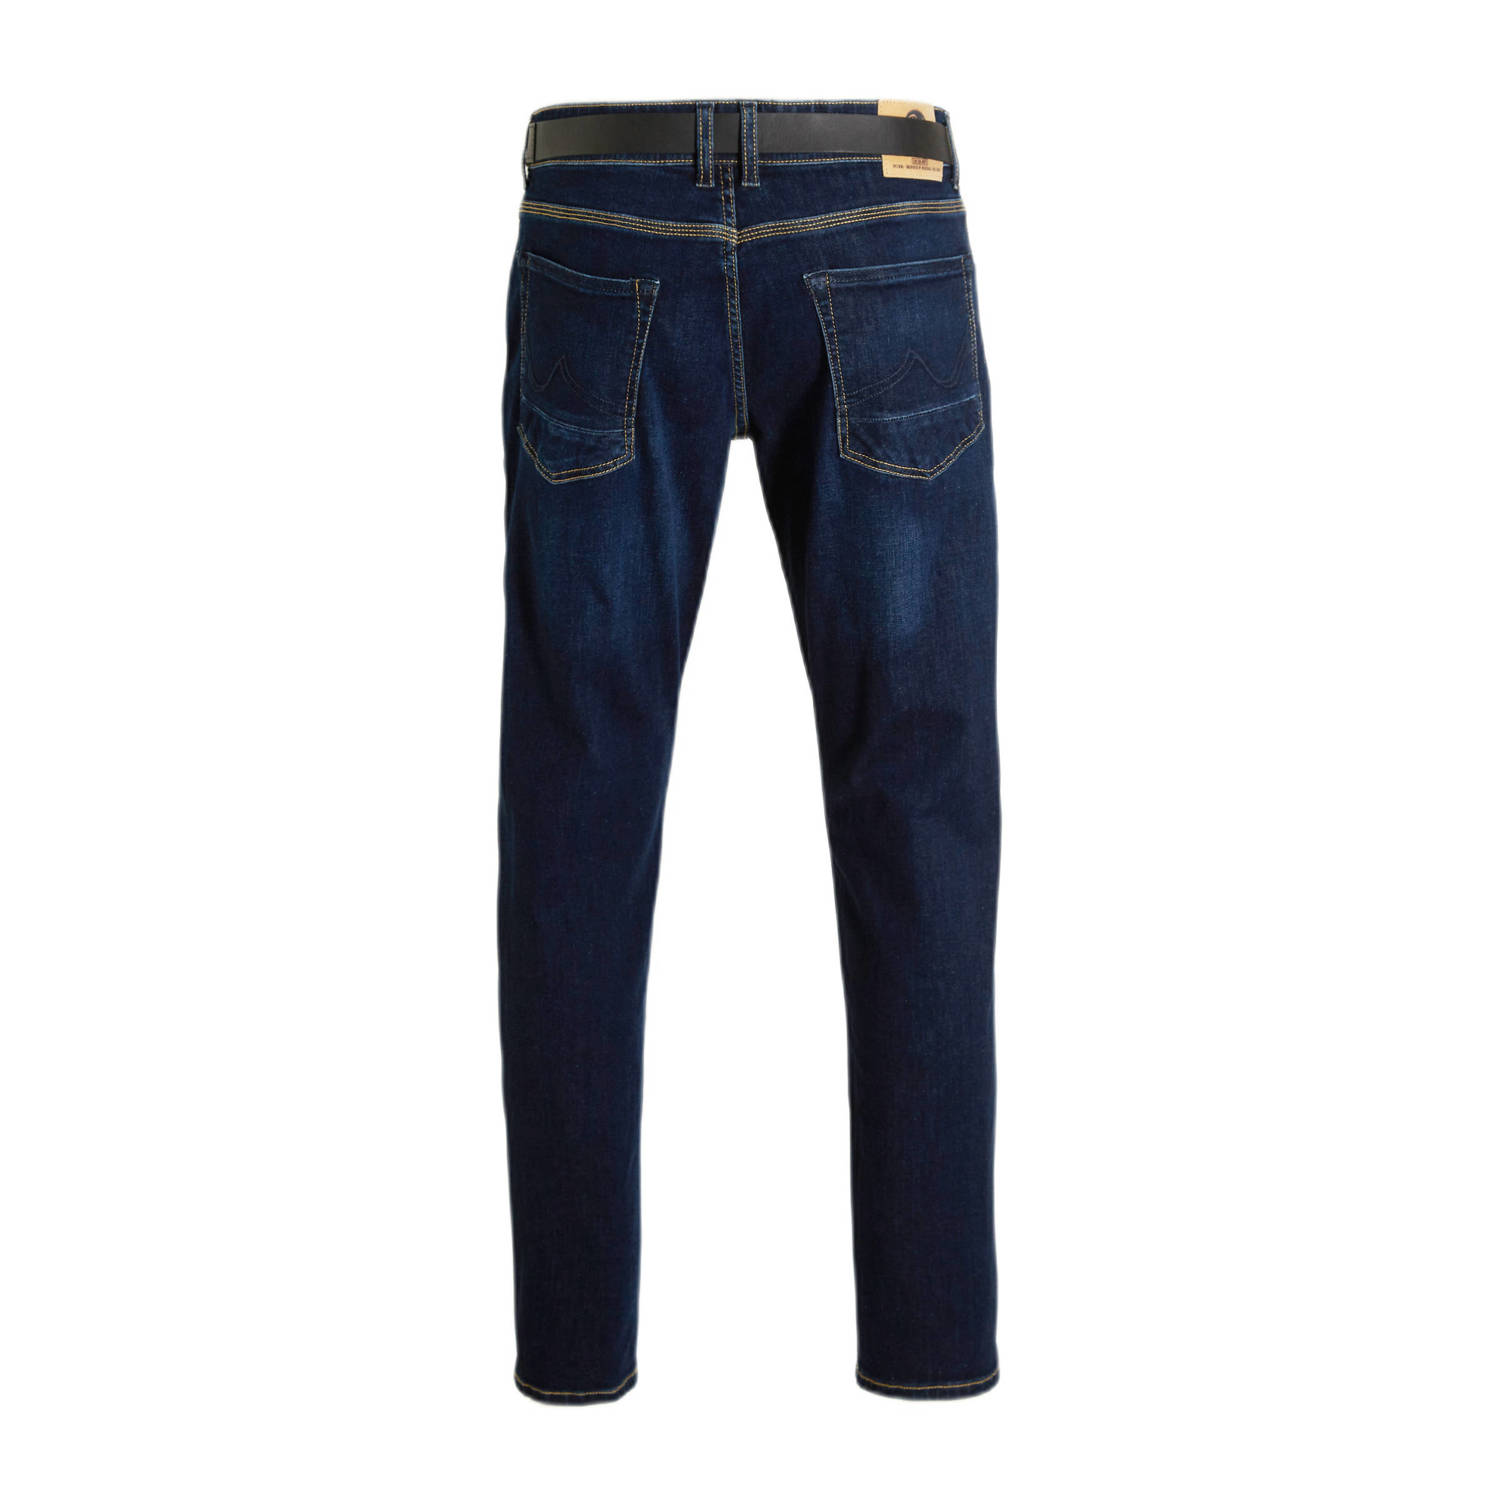 Petrol Industries tapered fit jeans RUSSEL-CLASSIC dark stone